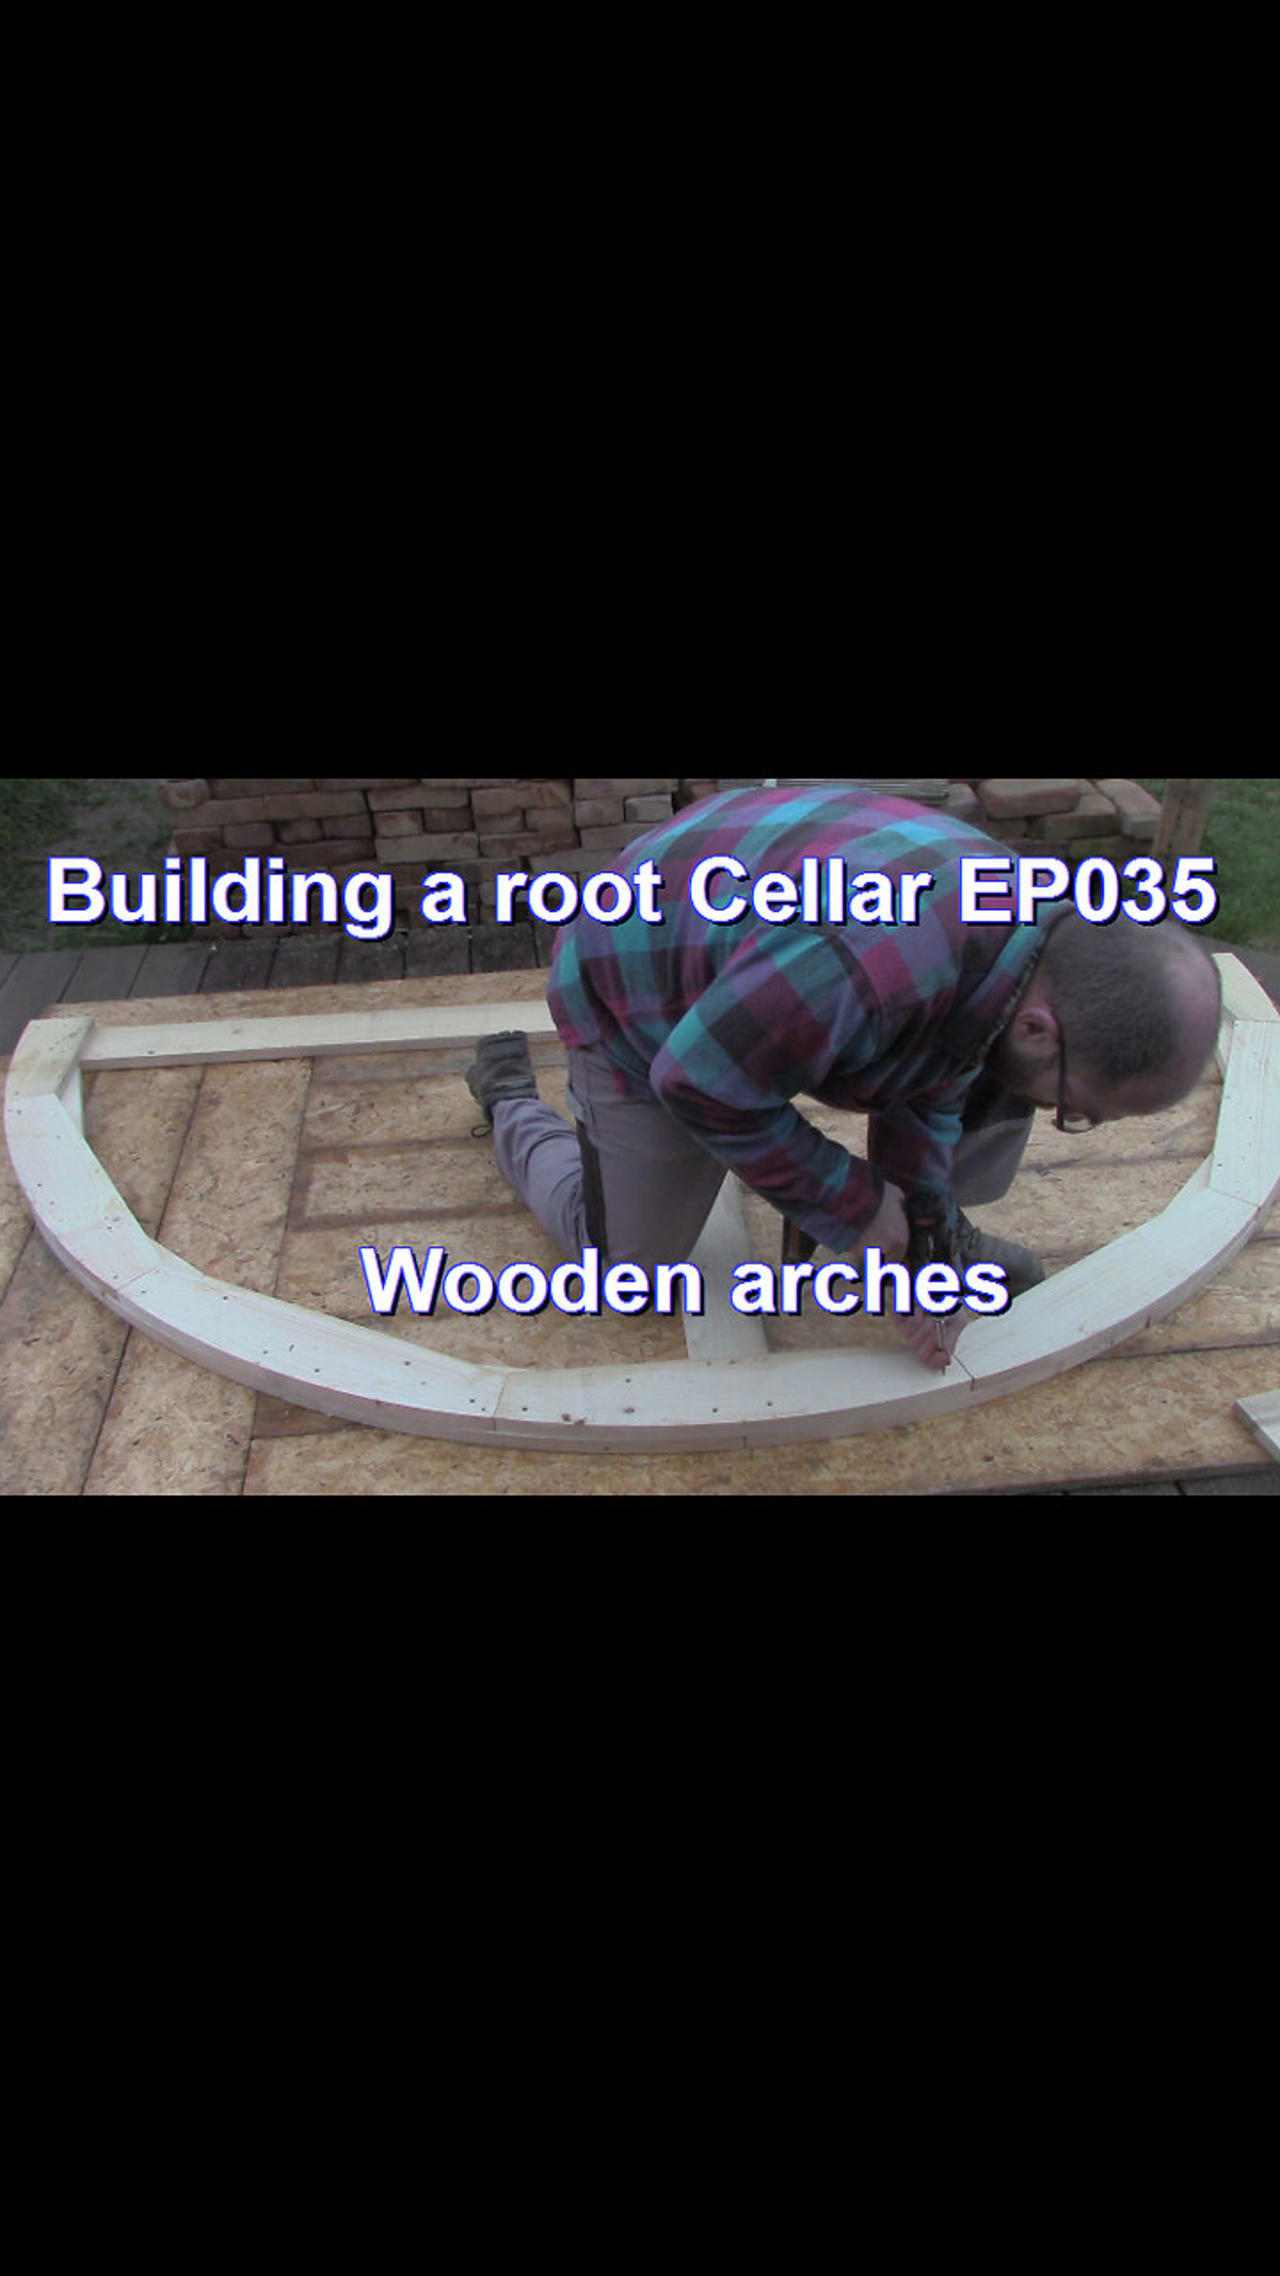 Building a root cellar EP035.5 - Woodworking is coming